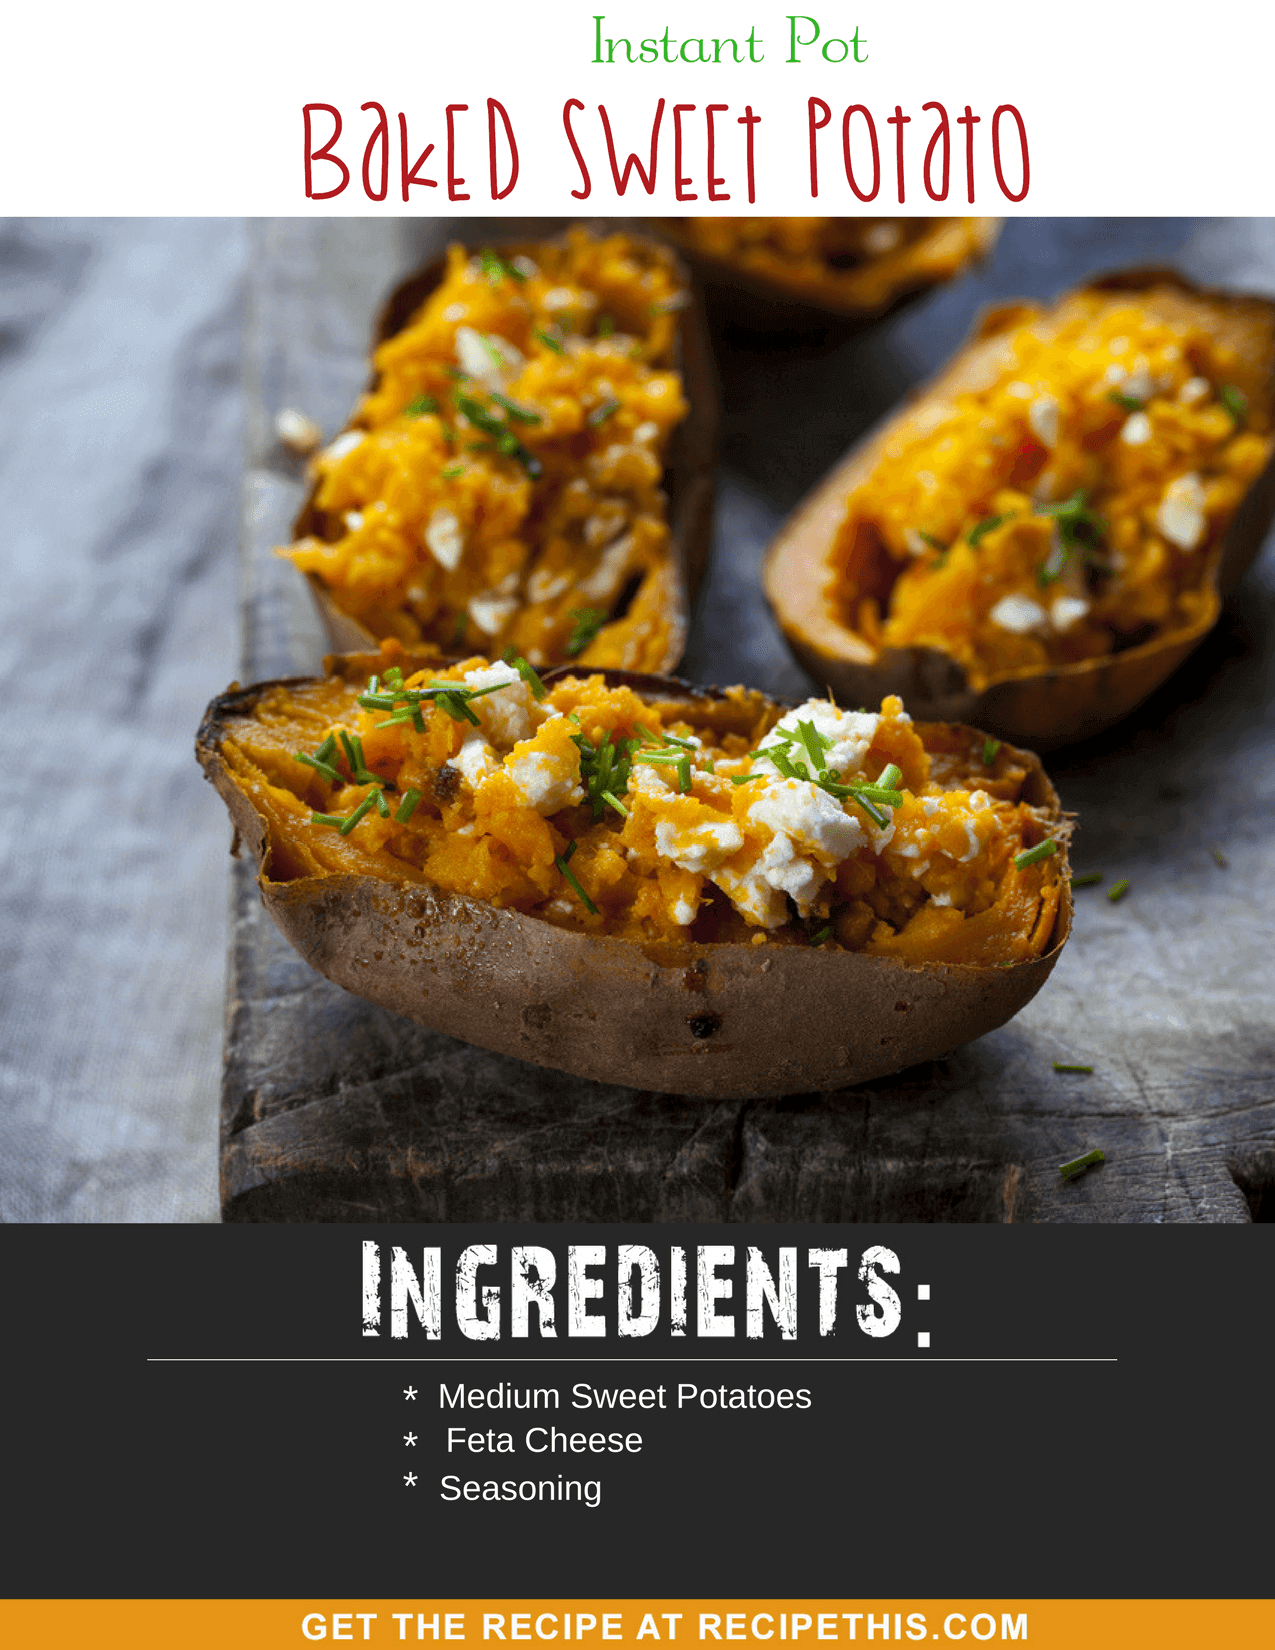 #InstantPot Recipes | Instant Pot Baked Sweet Potatoes from RecipeThis.com